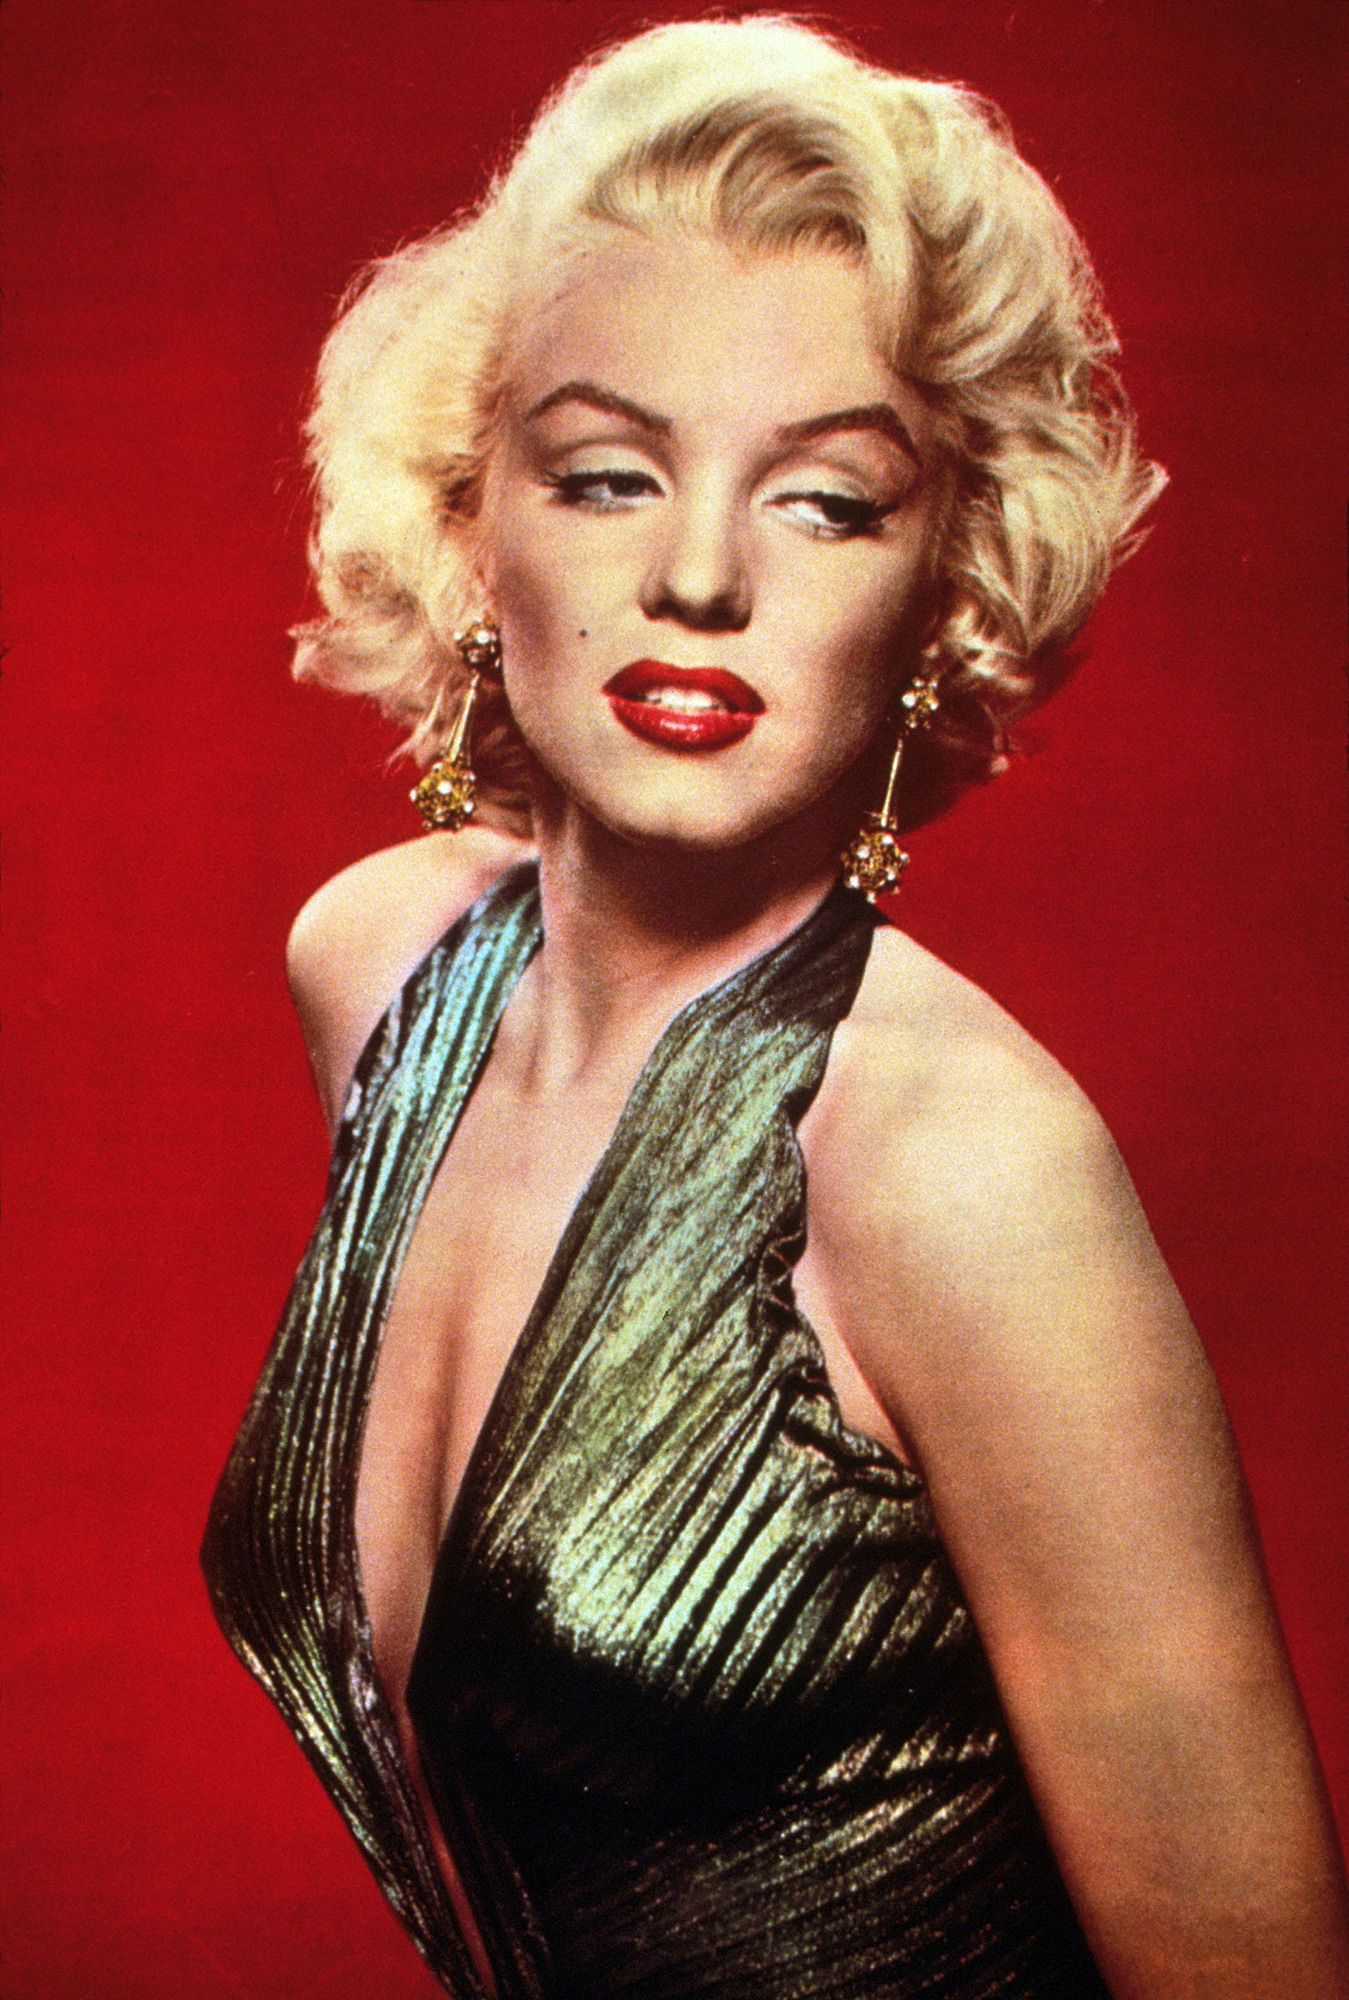 Marilyn Monroe's friend on her how her death happened